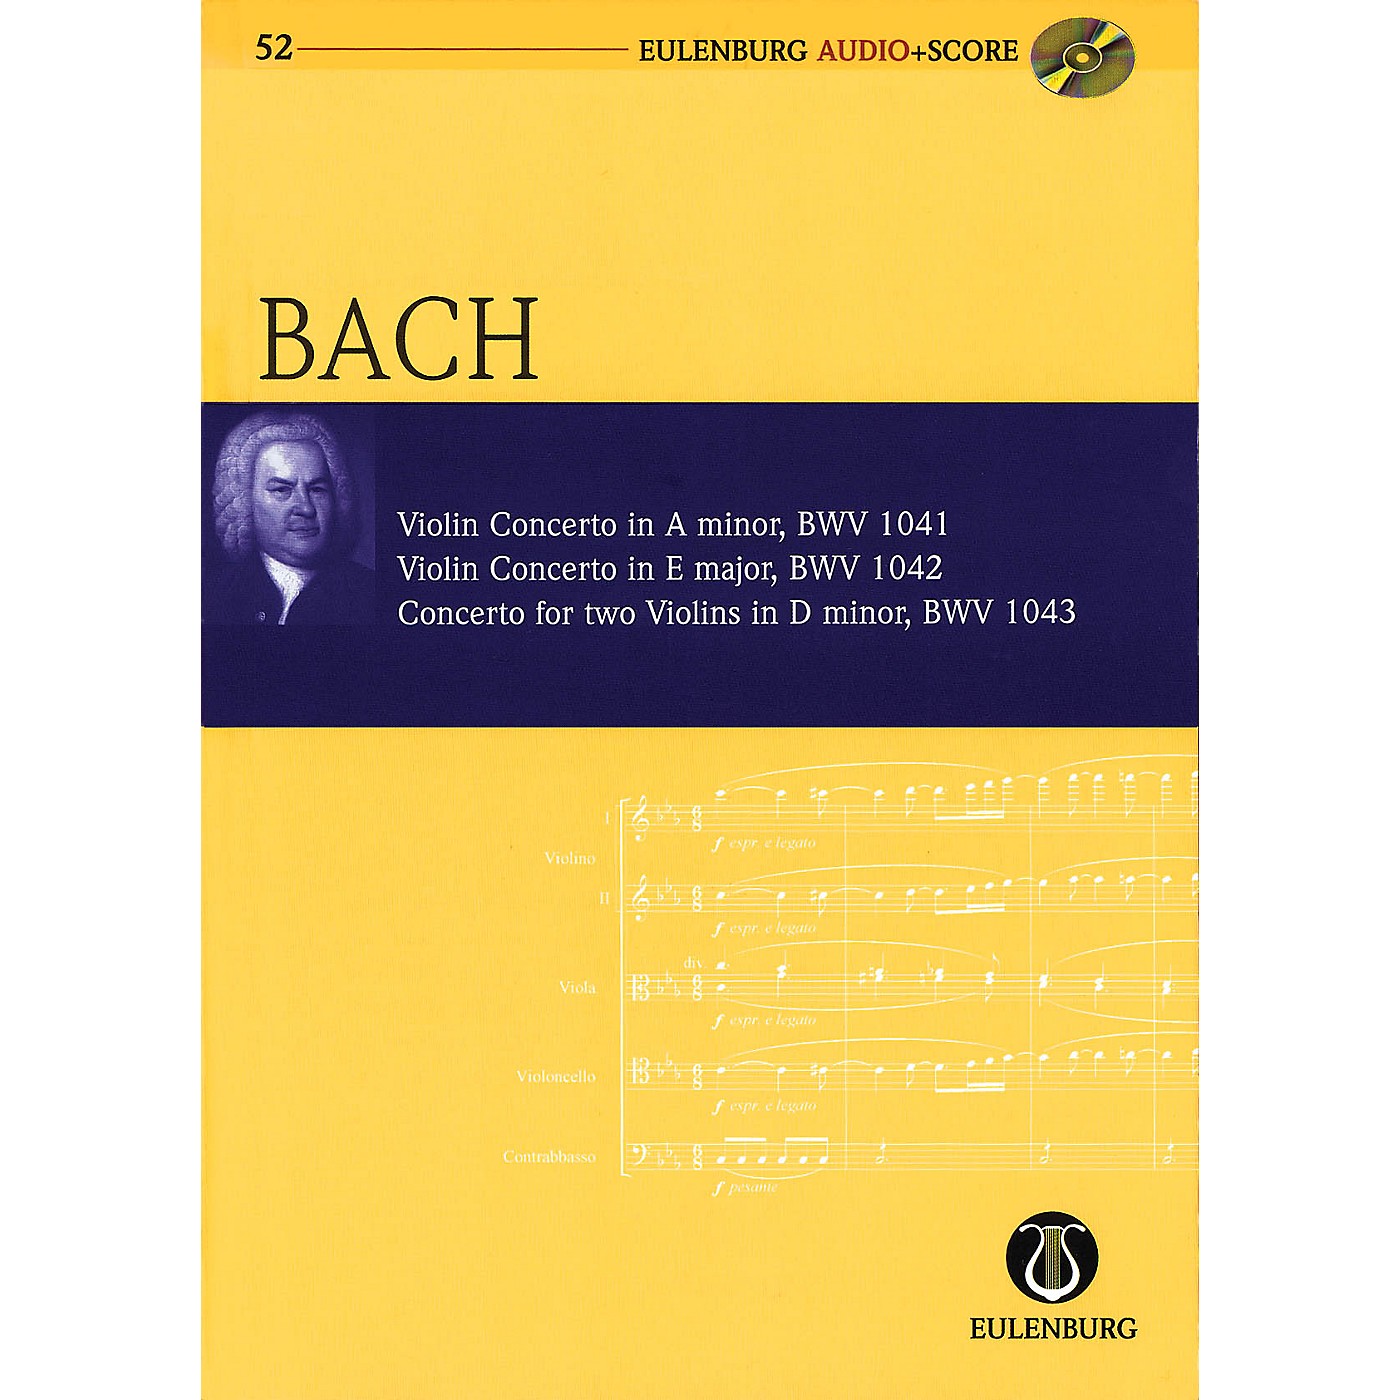 Eulenburg Violin Concerto in A minor and others Eulenberg Audio plus Score w/ CD by Bach Edited by Richard Clarke thumbnail